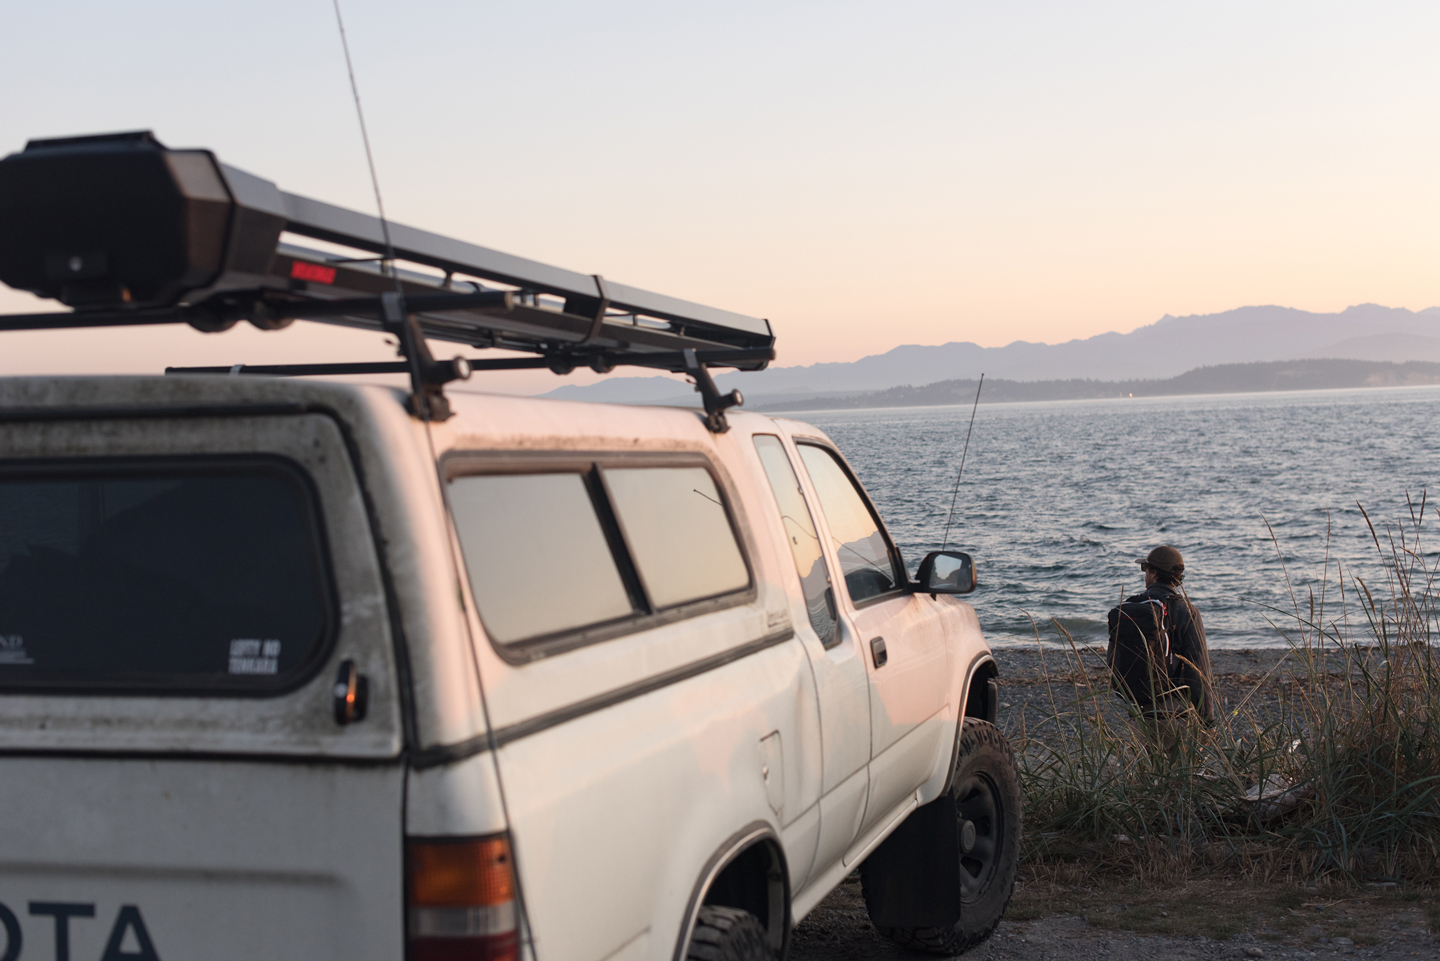 Yakima Double Haul Rooftop Rod Carrier - The FlyFish Journal